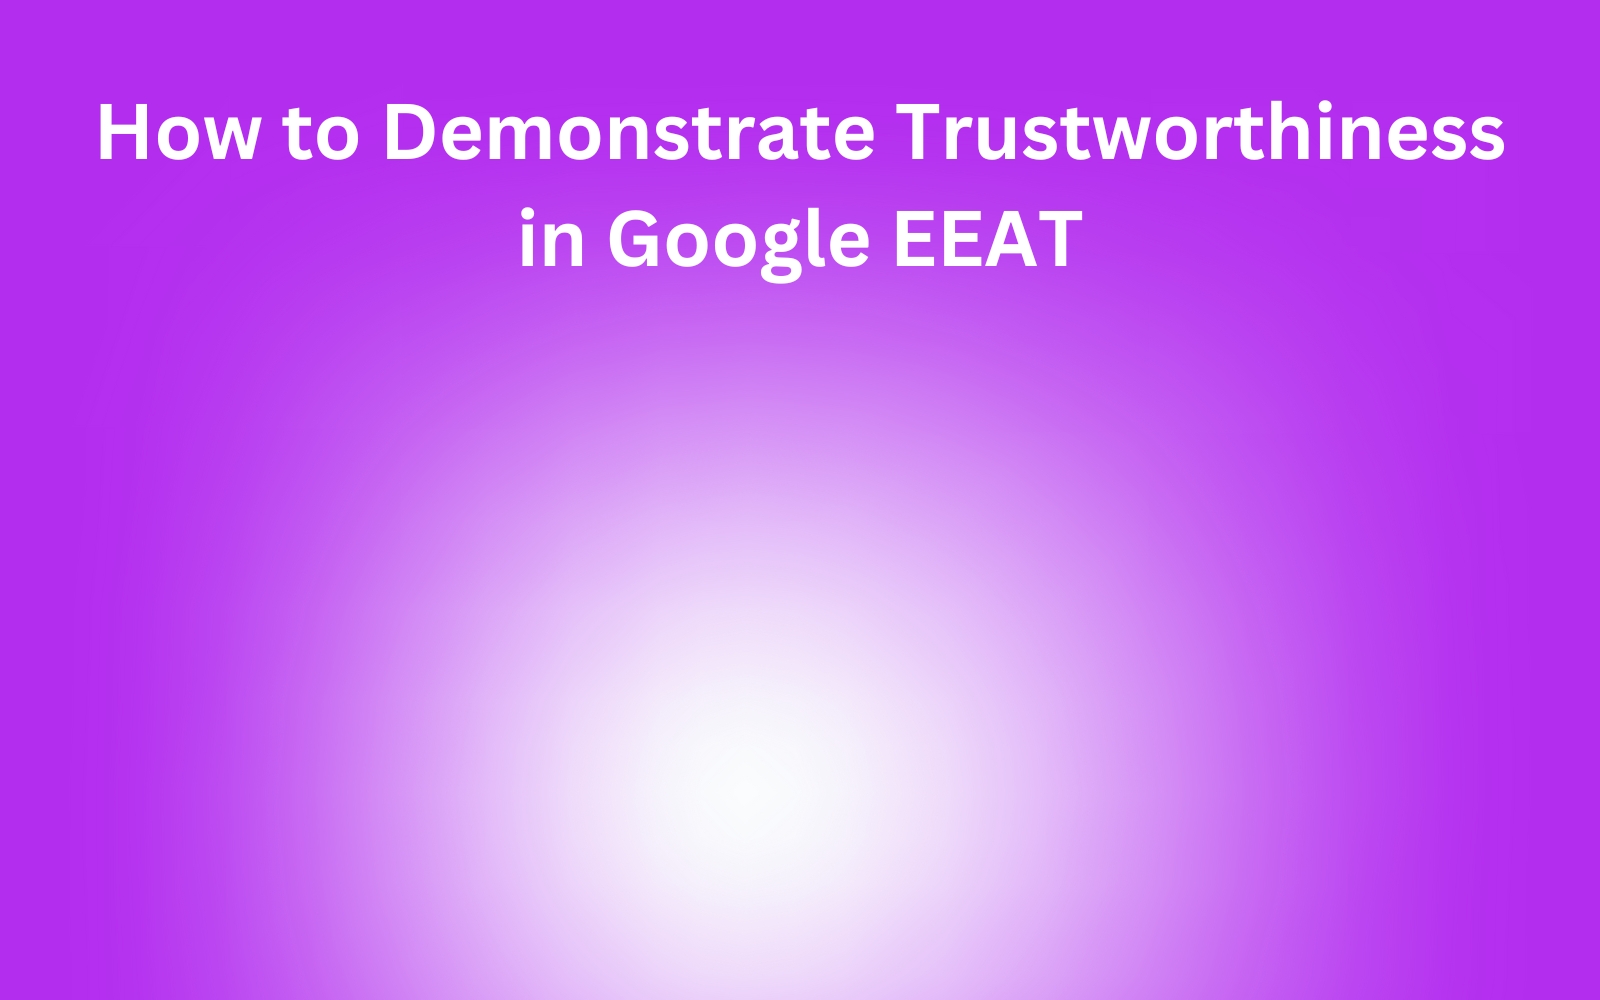 How to Demonstrate Trustworthiness in Google EEAT